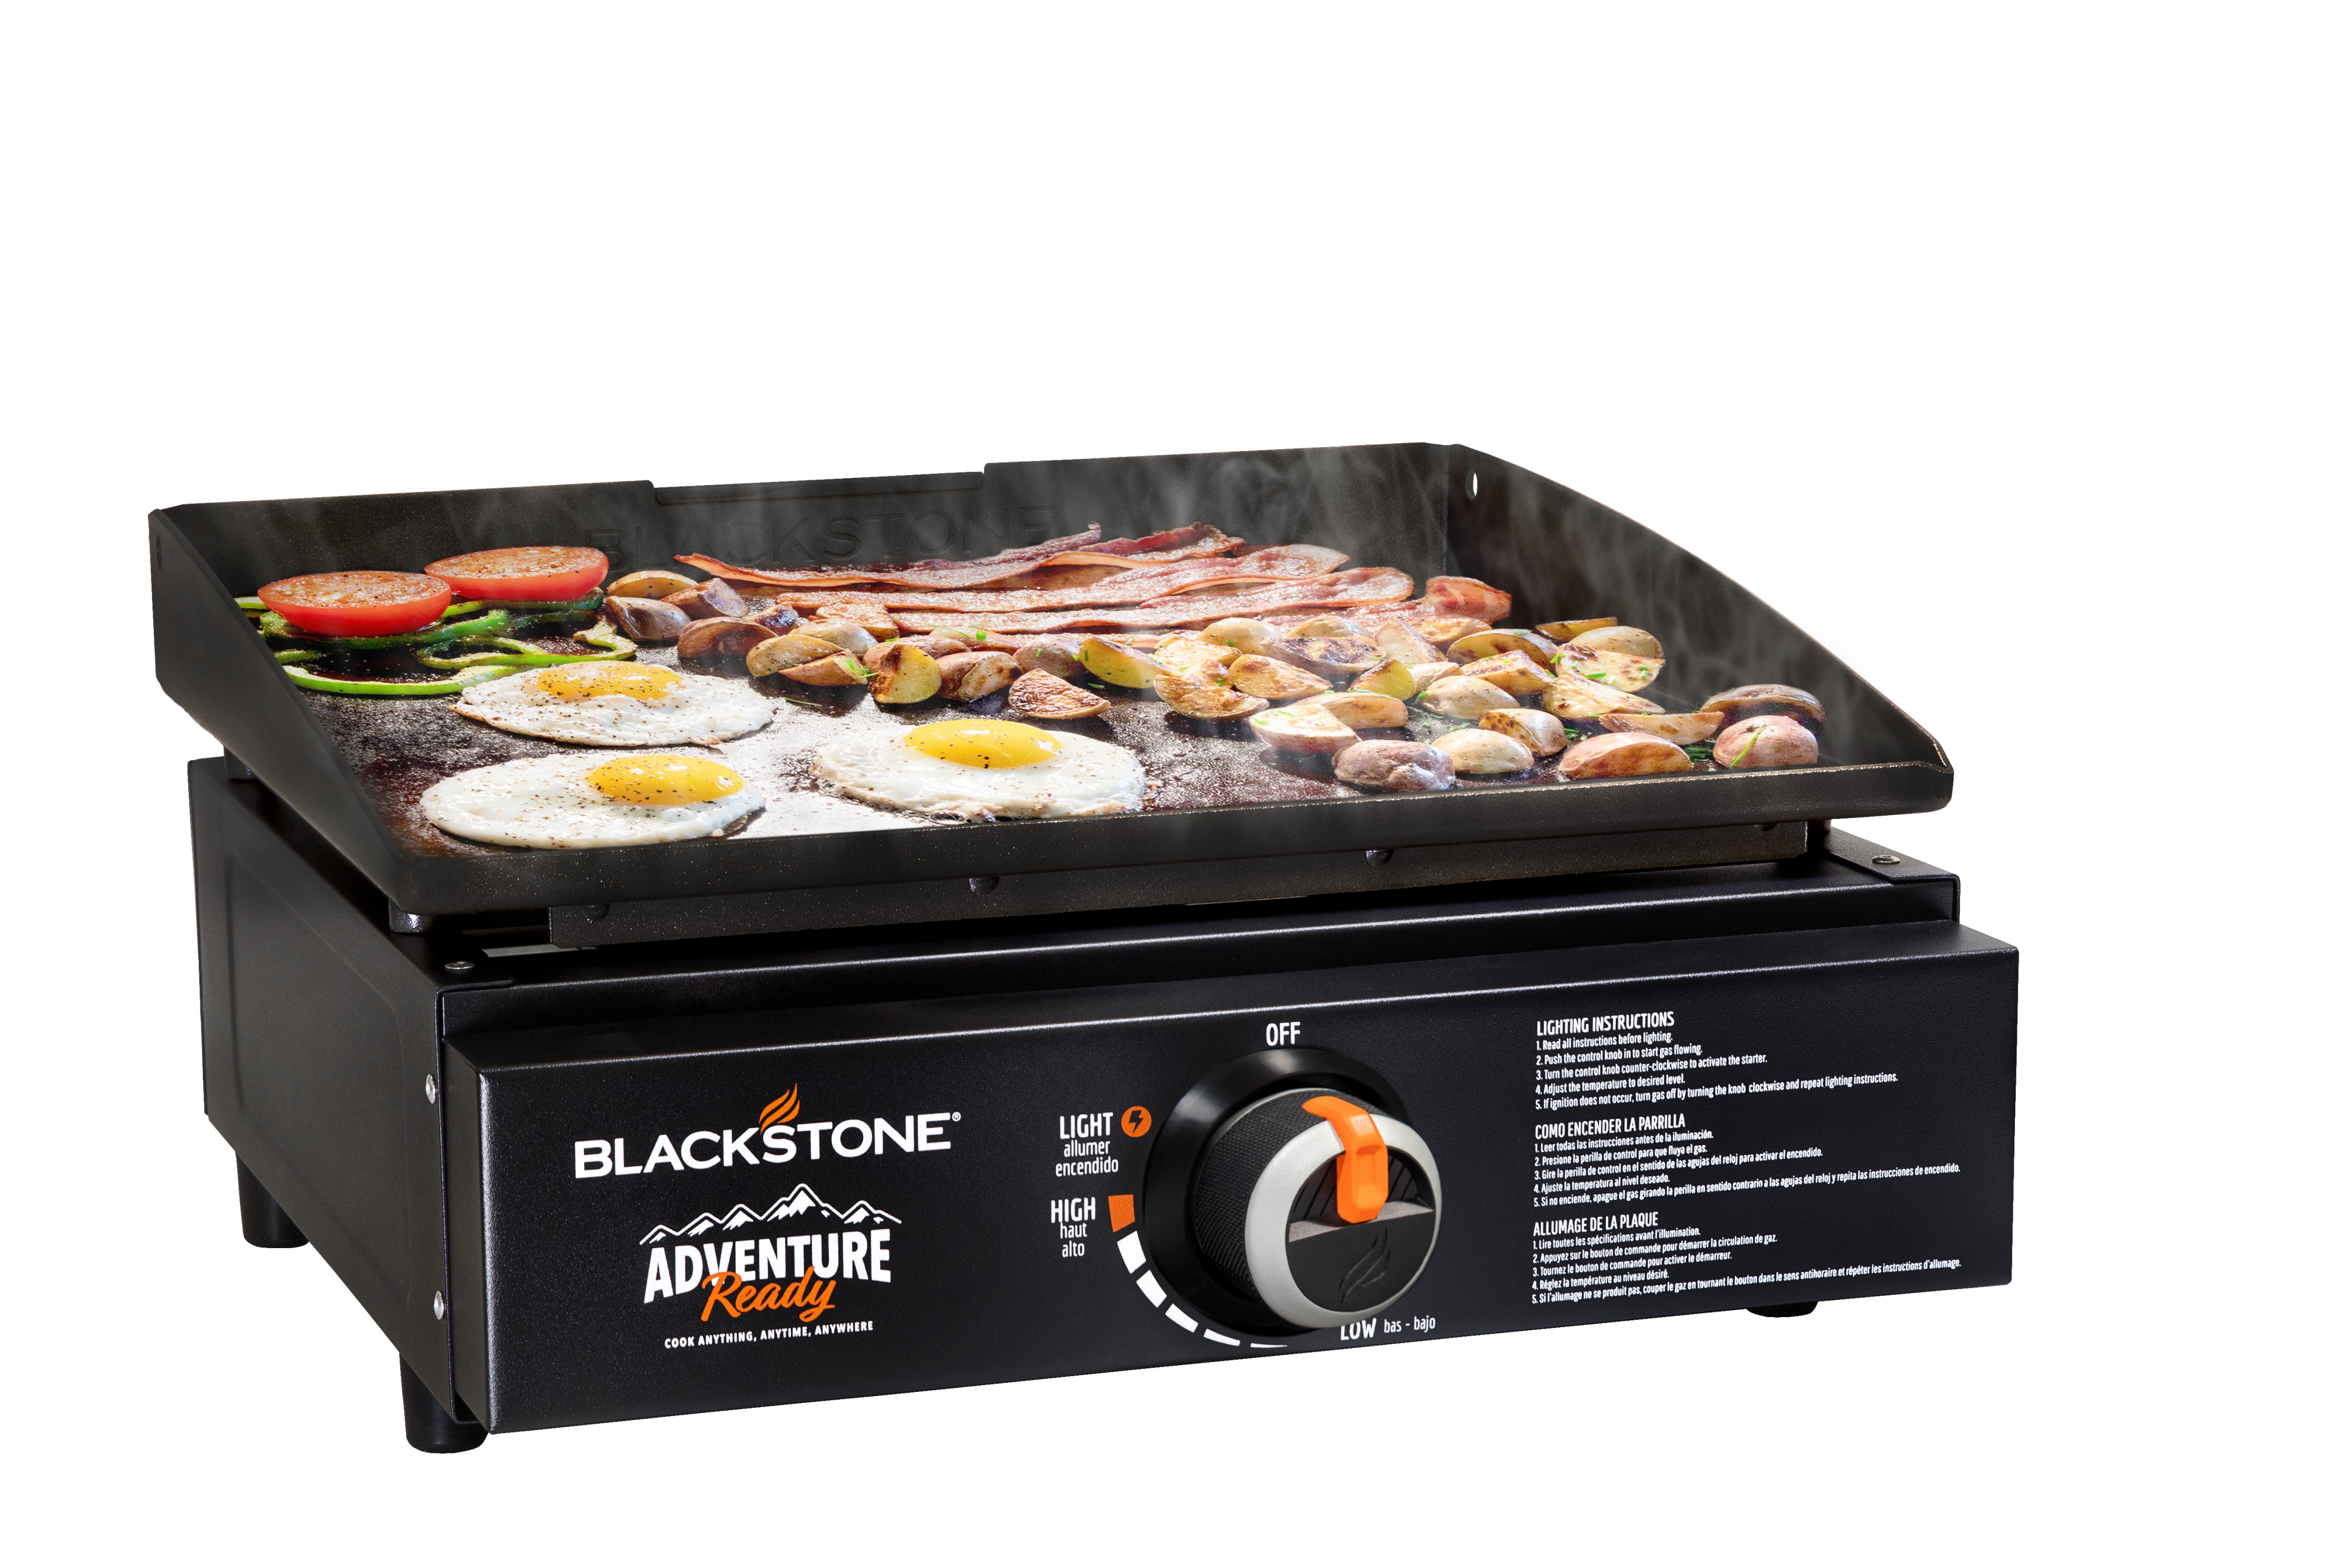 Buy Blackstone Adventure Ready 17 Tabletop Outdoor Griddle Online In Hungary 805843608